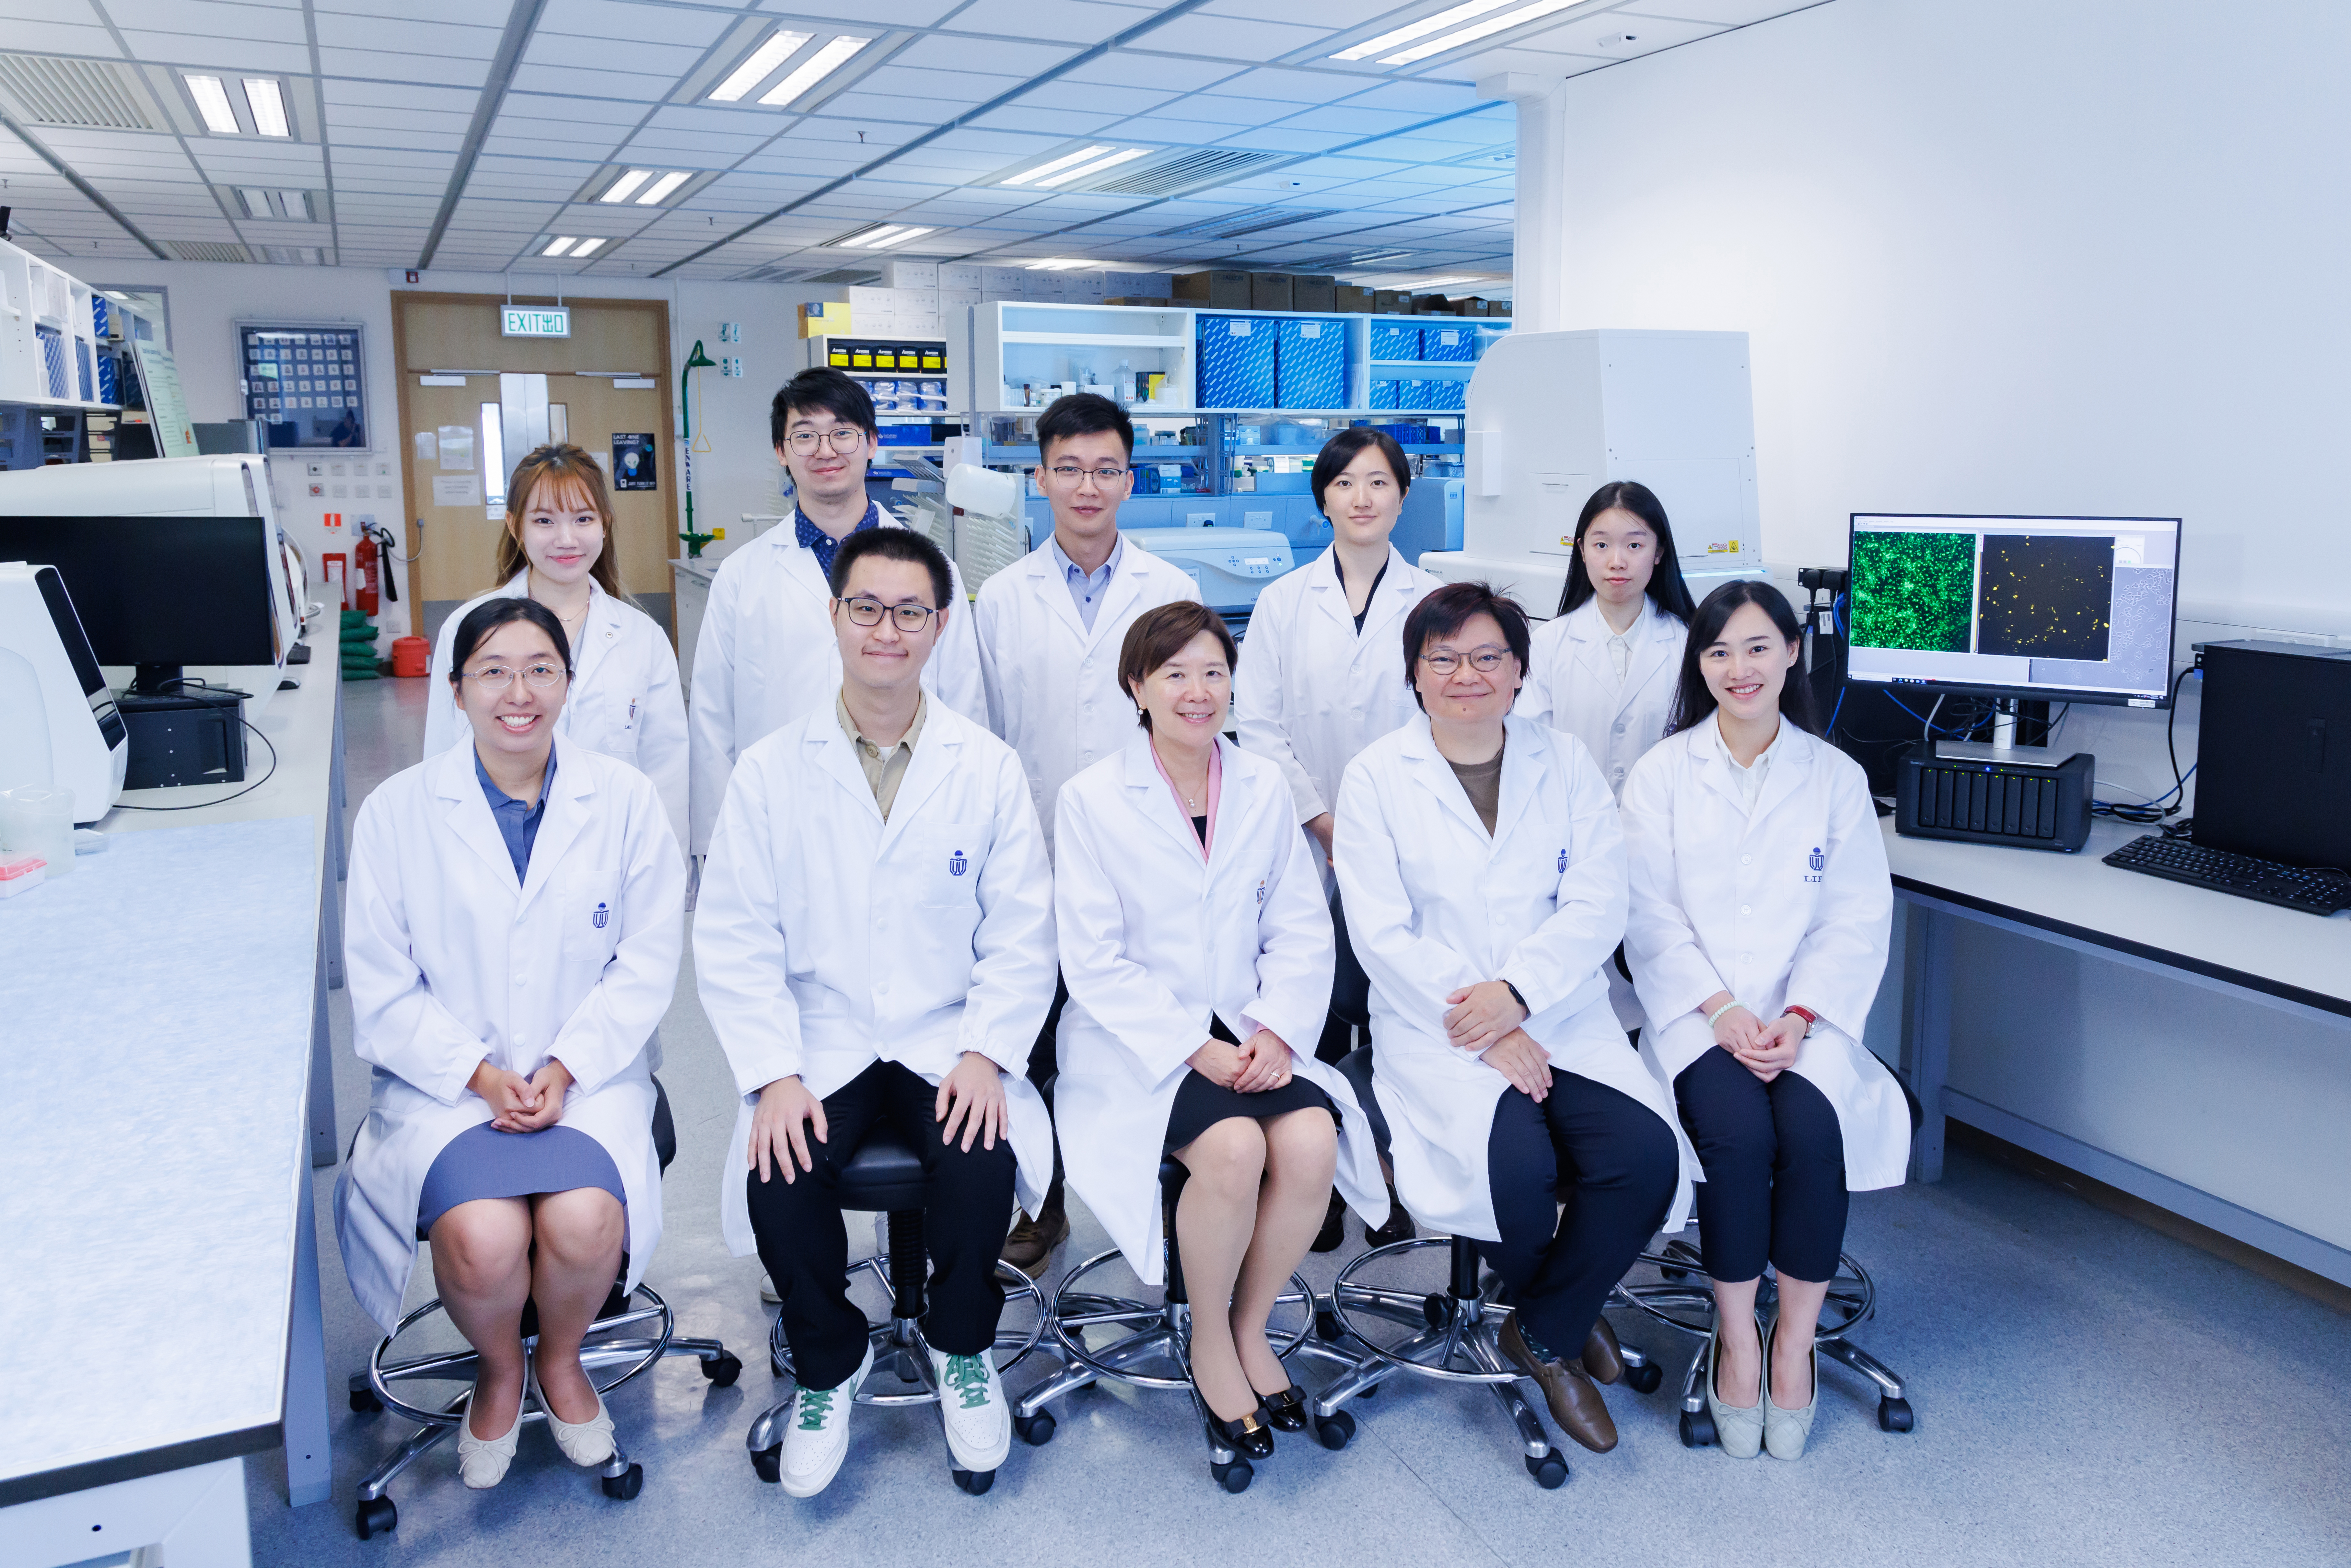 HKUST President Prof. Nancy IP (center, front row), Research Professor Prof. Amy FU (second right, front row), a co-first author of this research paper Mr. WU Wei (second left, front row), and Research Assistant Professor Prof. WONG Hiu Yi (first left, front row) with other members of the HKUST Division of Life Science research team.